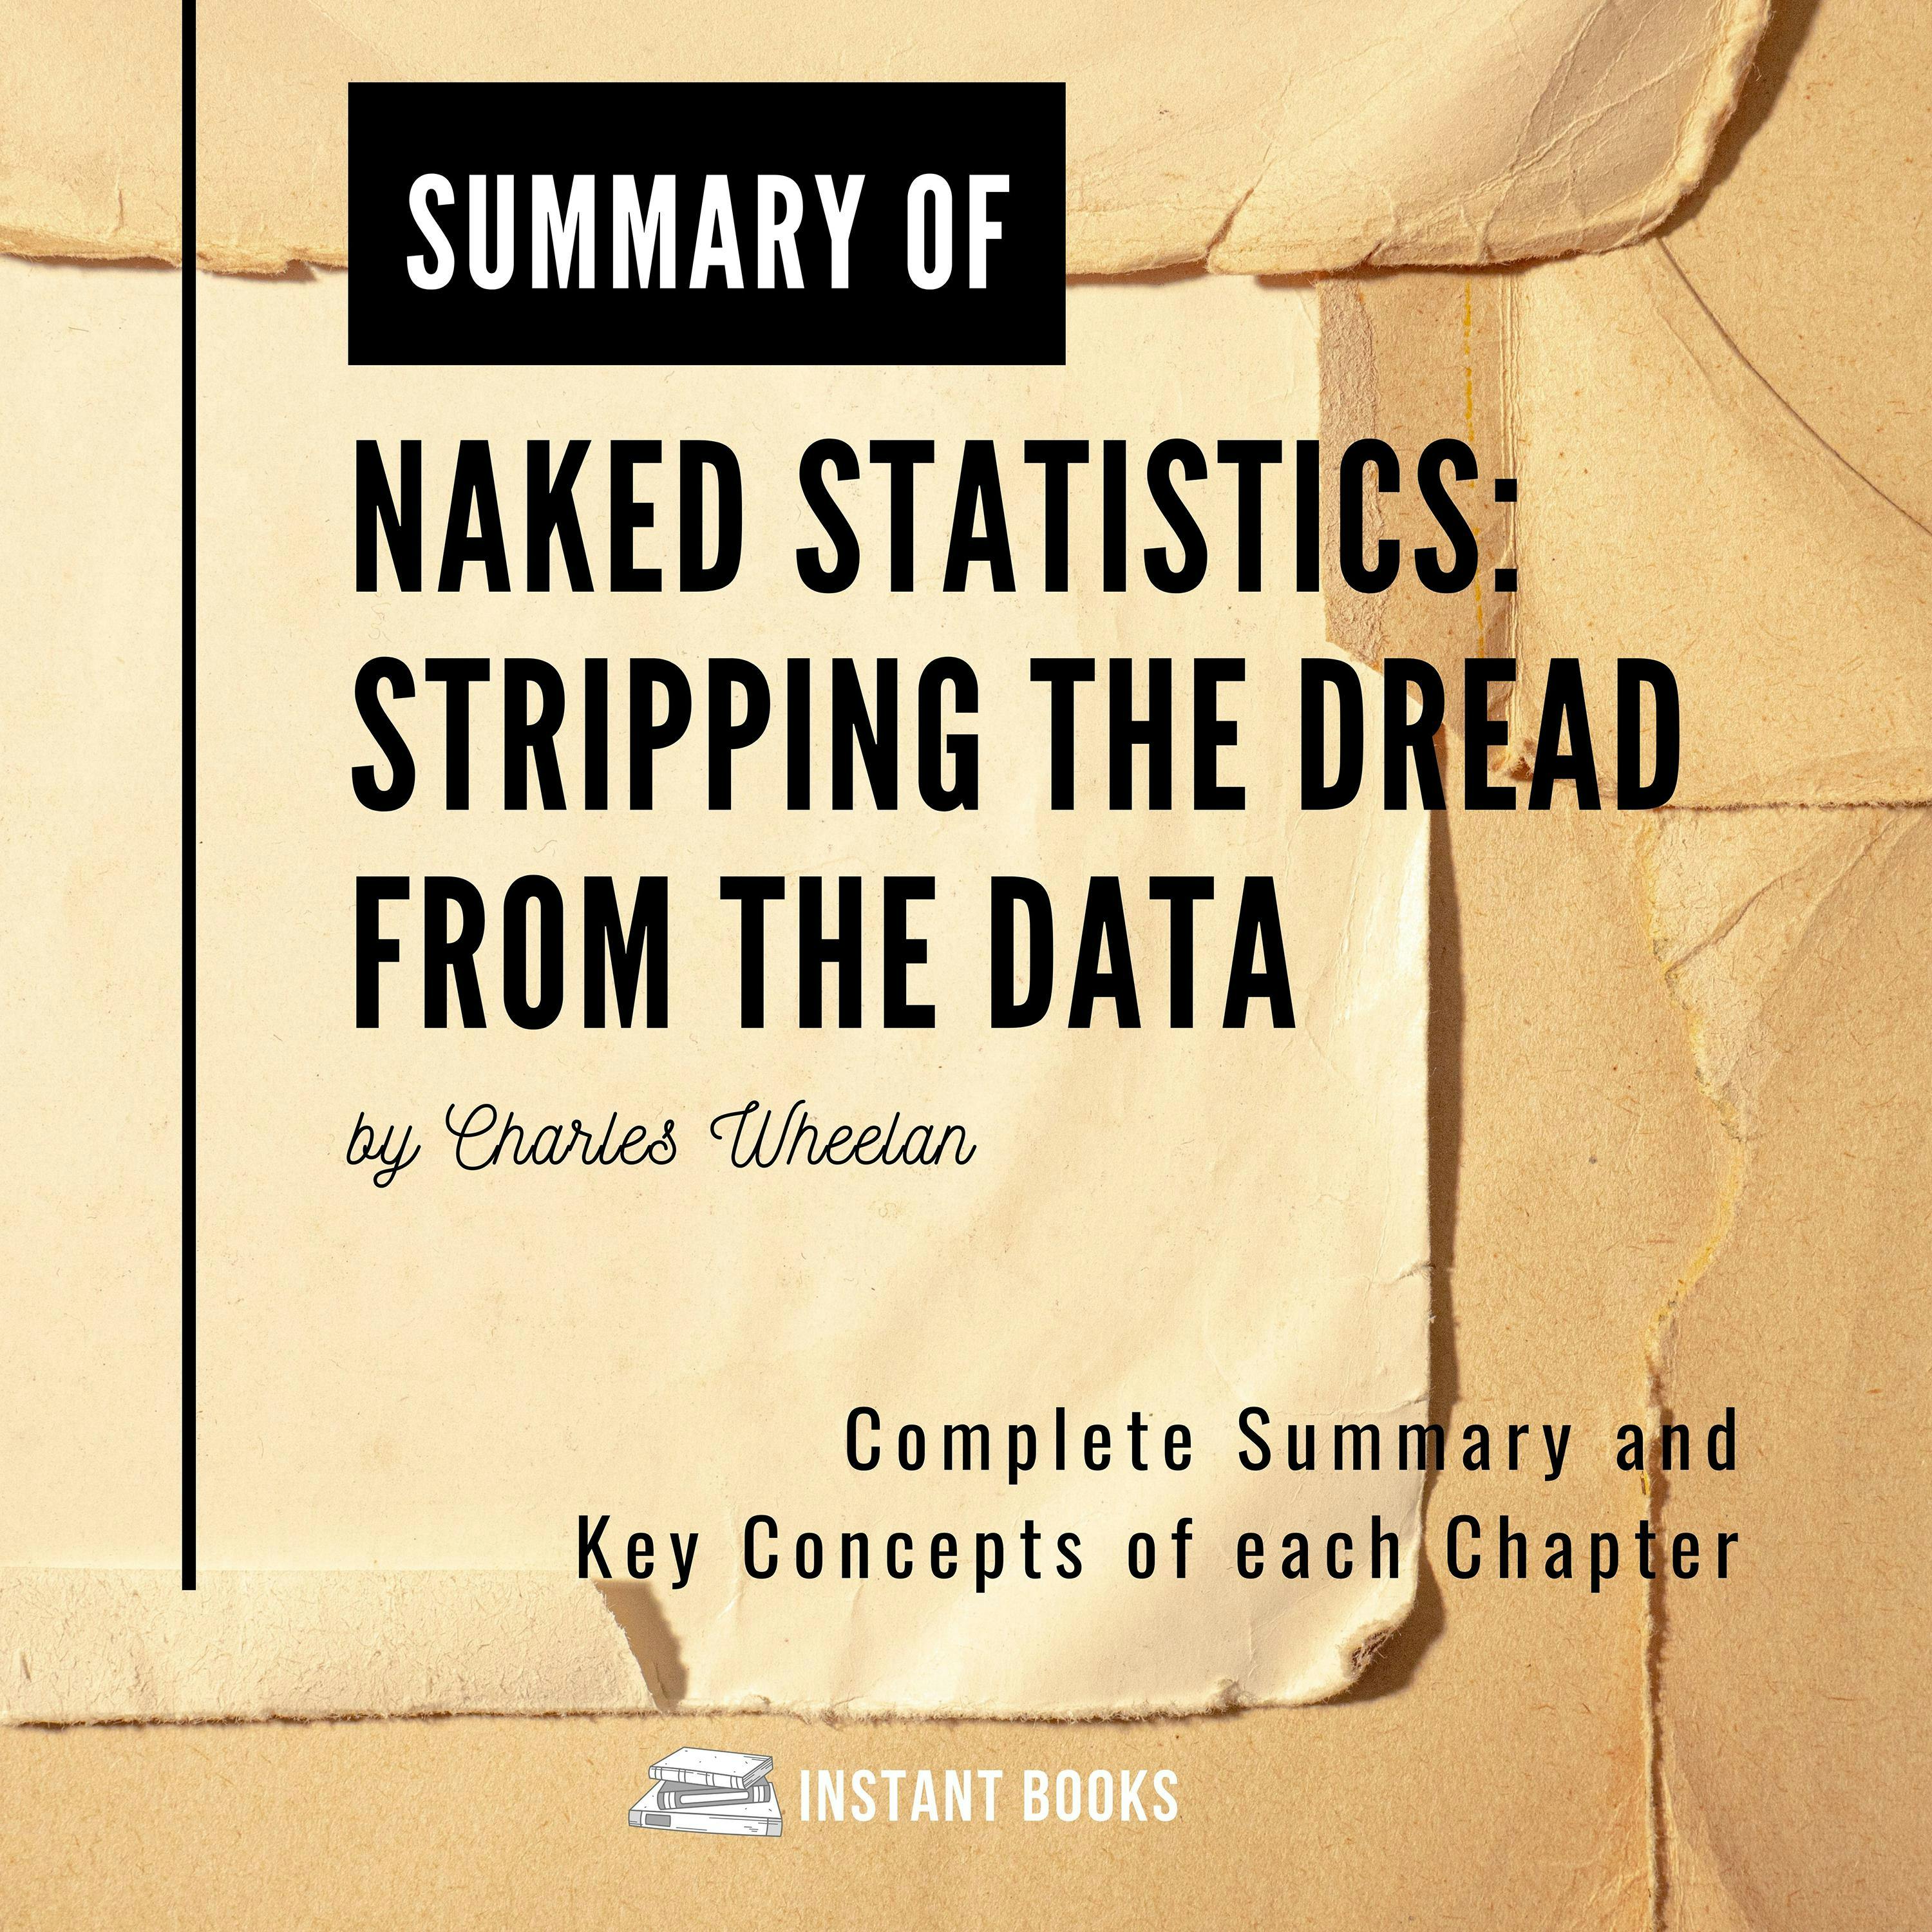 Summary of Naked Statistic: Stripping the Dread from the Data by Charles Wheelan: Complete Summary and Key Concepts of each Chapter - Istant Books